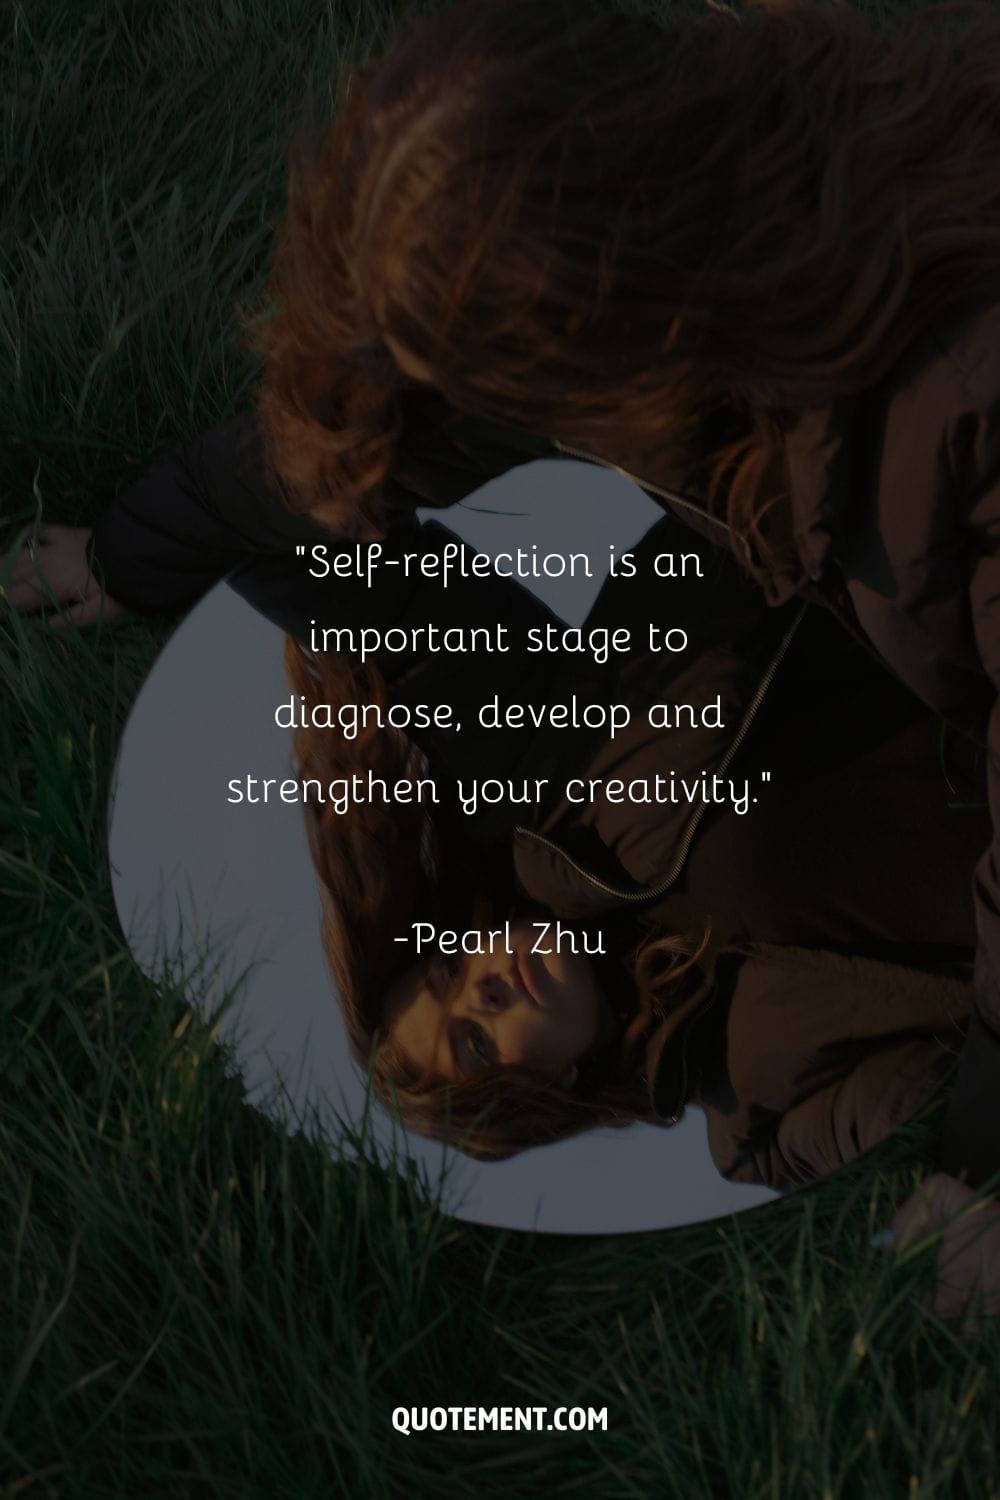 Self-reflection is an important stage to diagnose, develop and strengthen your creativity. – Pearl Zhu